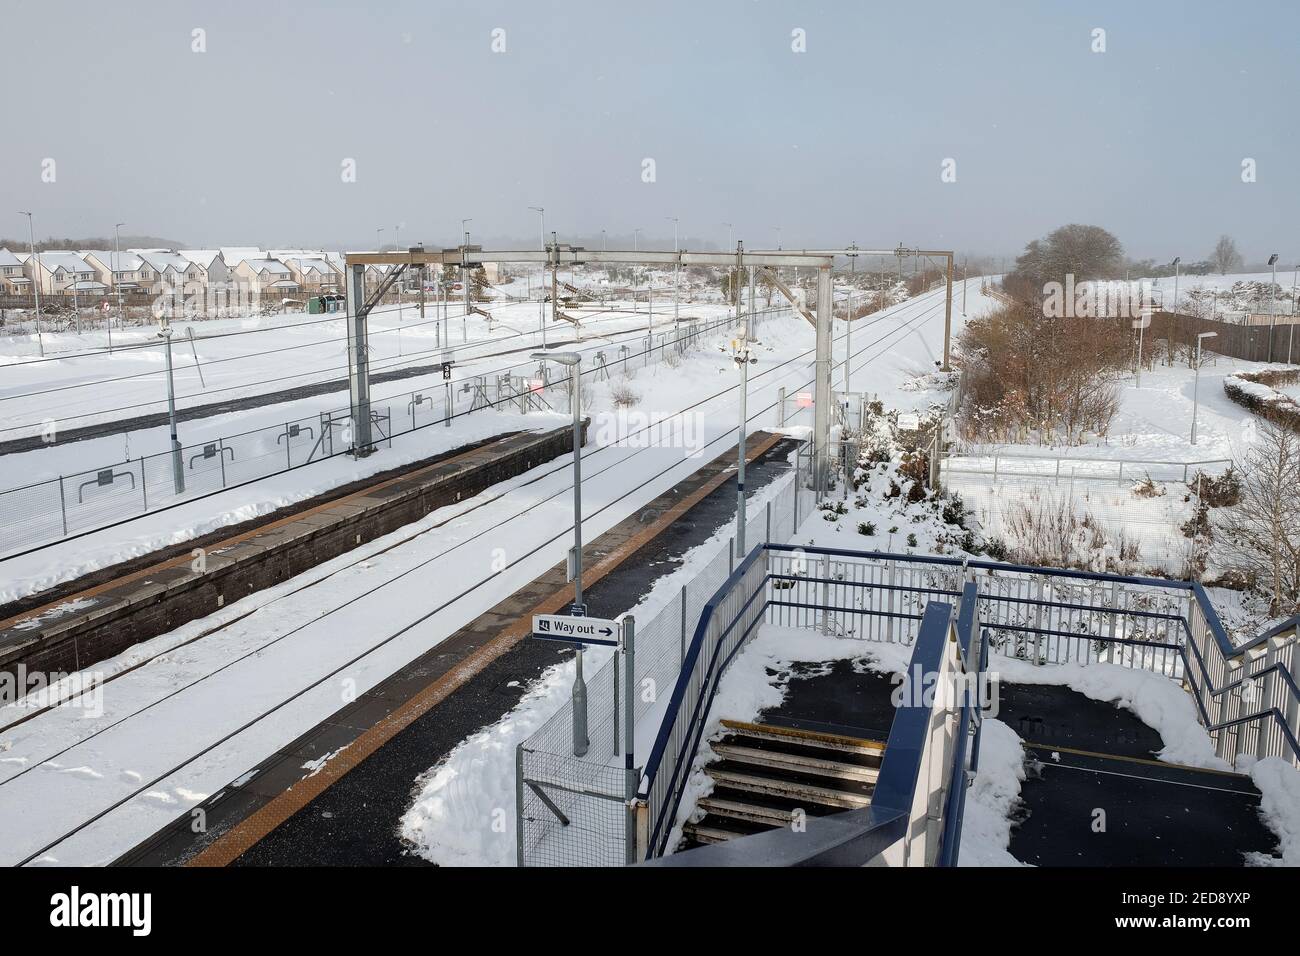 Railway station in winter with snow in Armadale, West Lothian, Scotland. FEBRUARY 10, 2021 Stock Photo